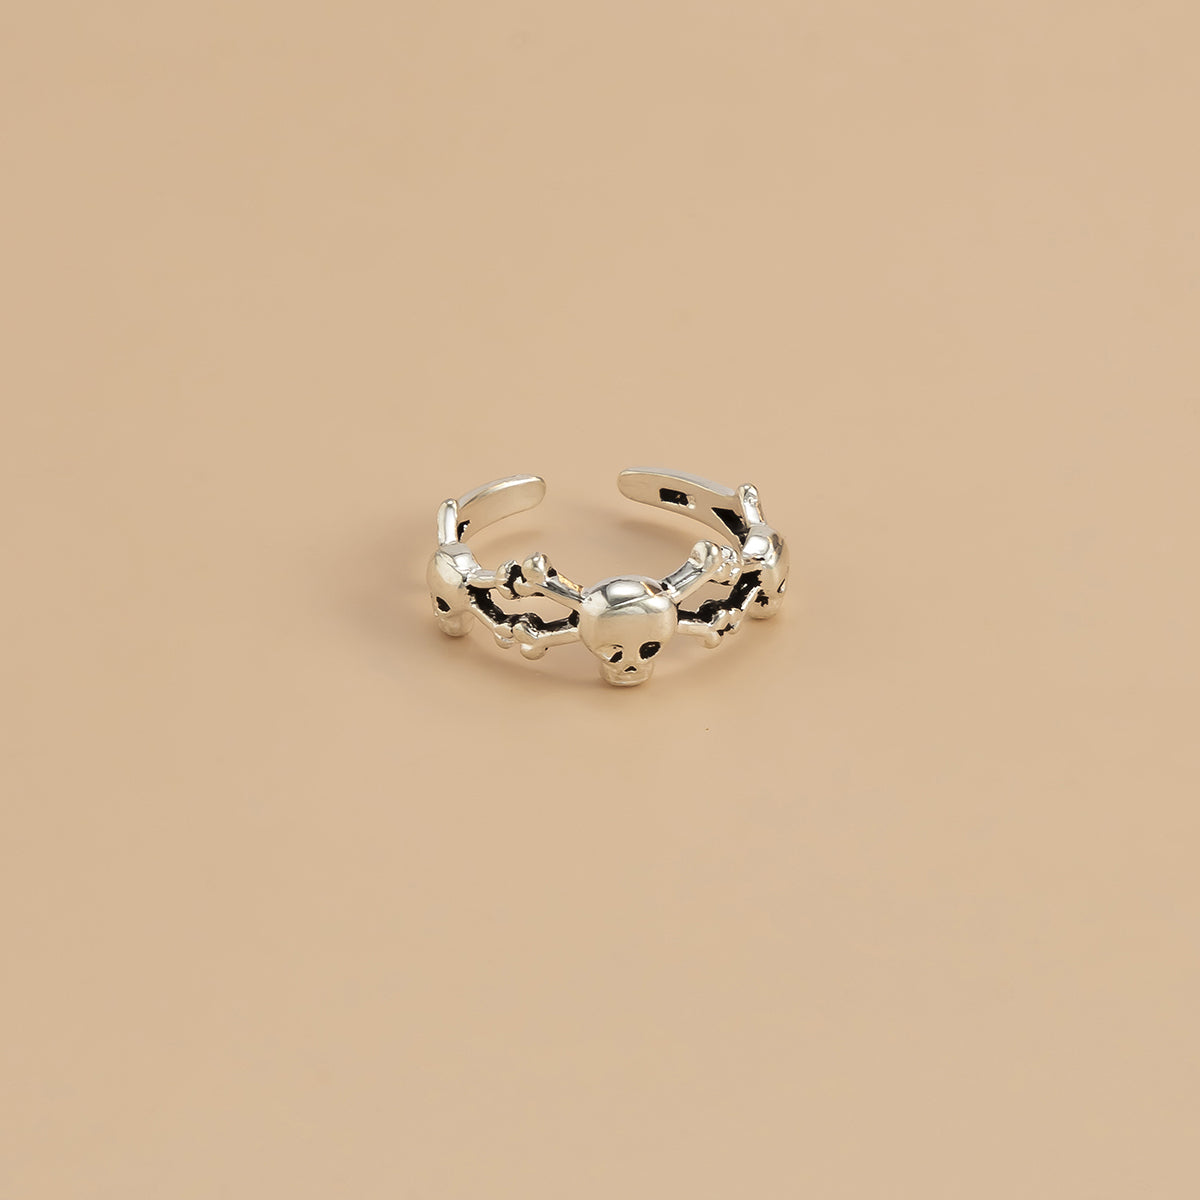 Silver-Plated Skull Spider Open Toe Ring